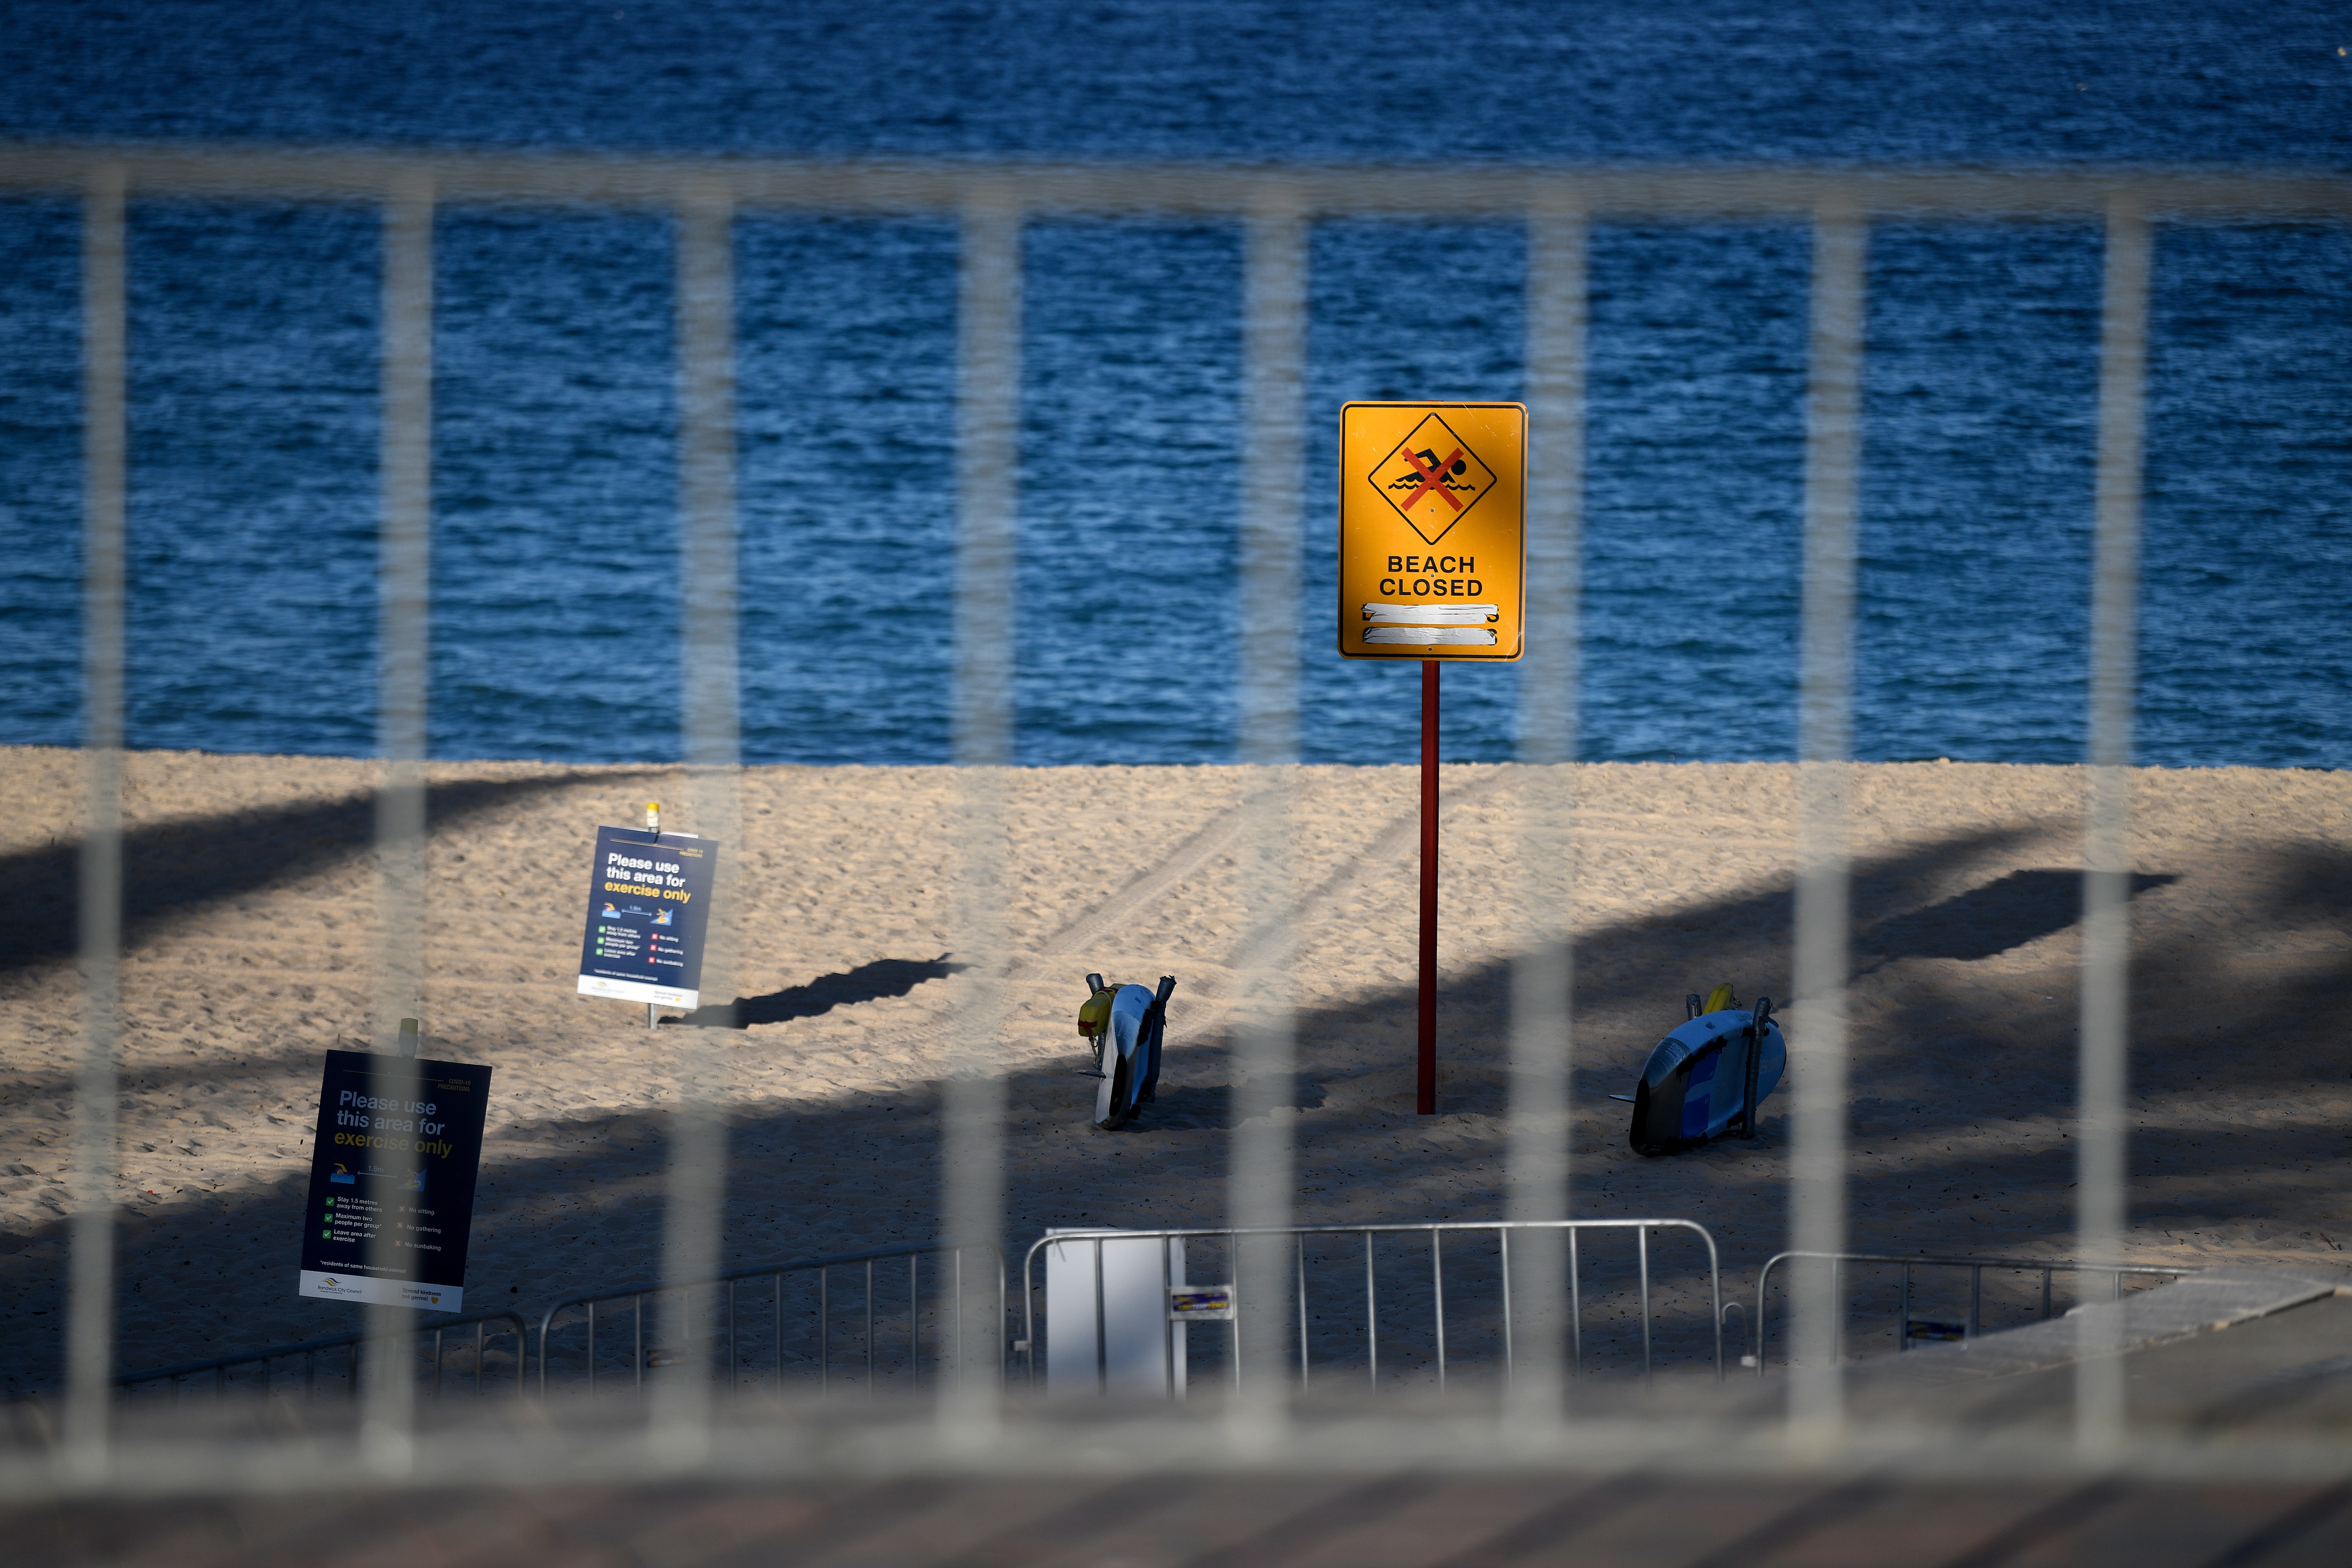 A beach closed sign at Coogee Beach in Sydney.